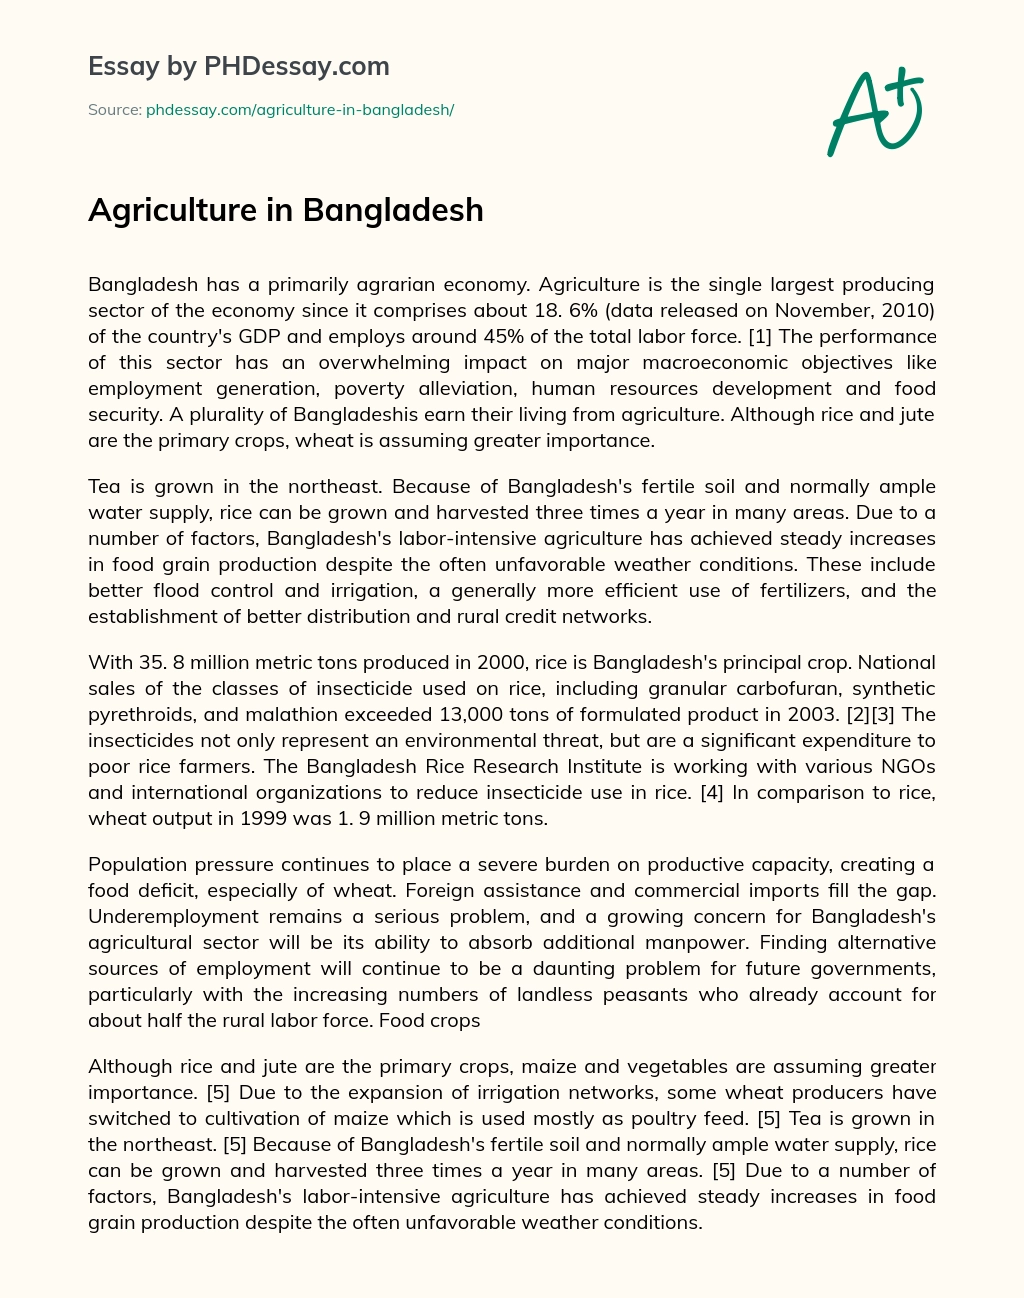 agriculture in bangladesh essay